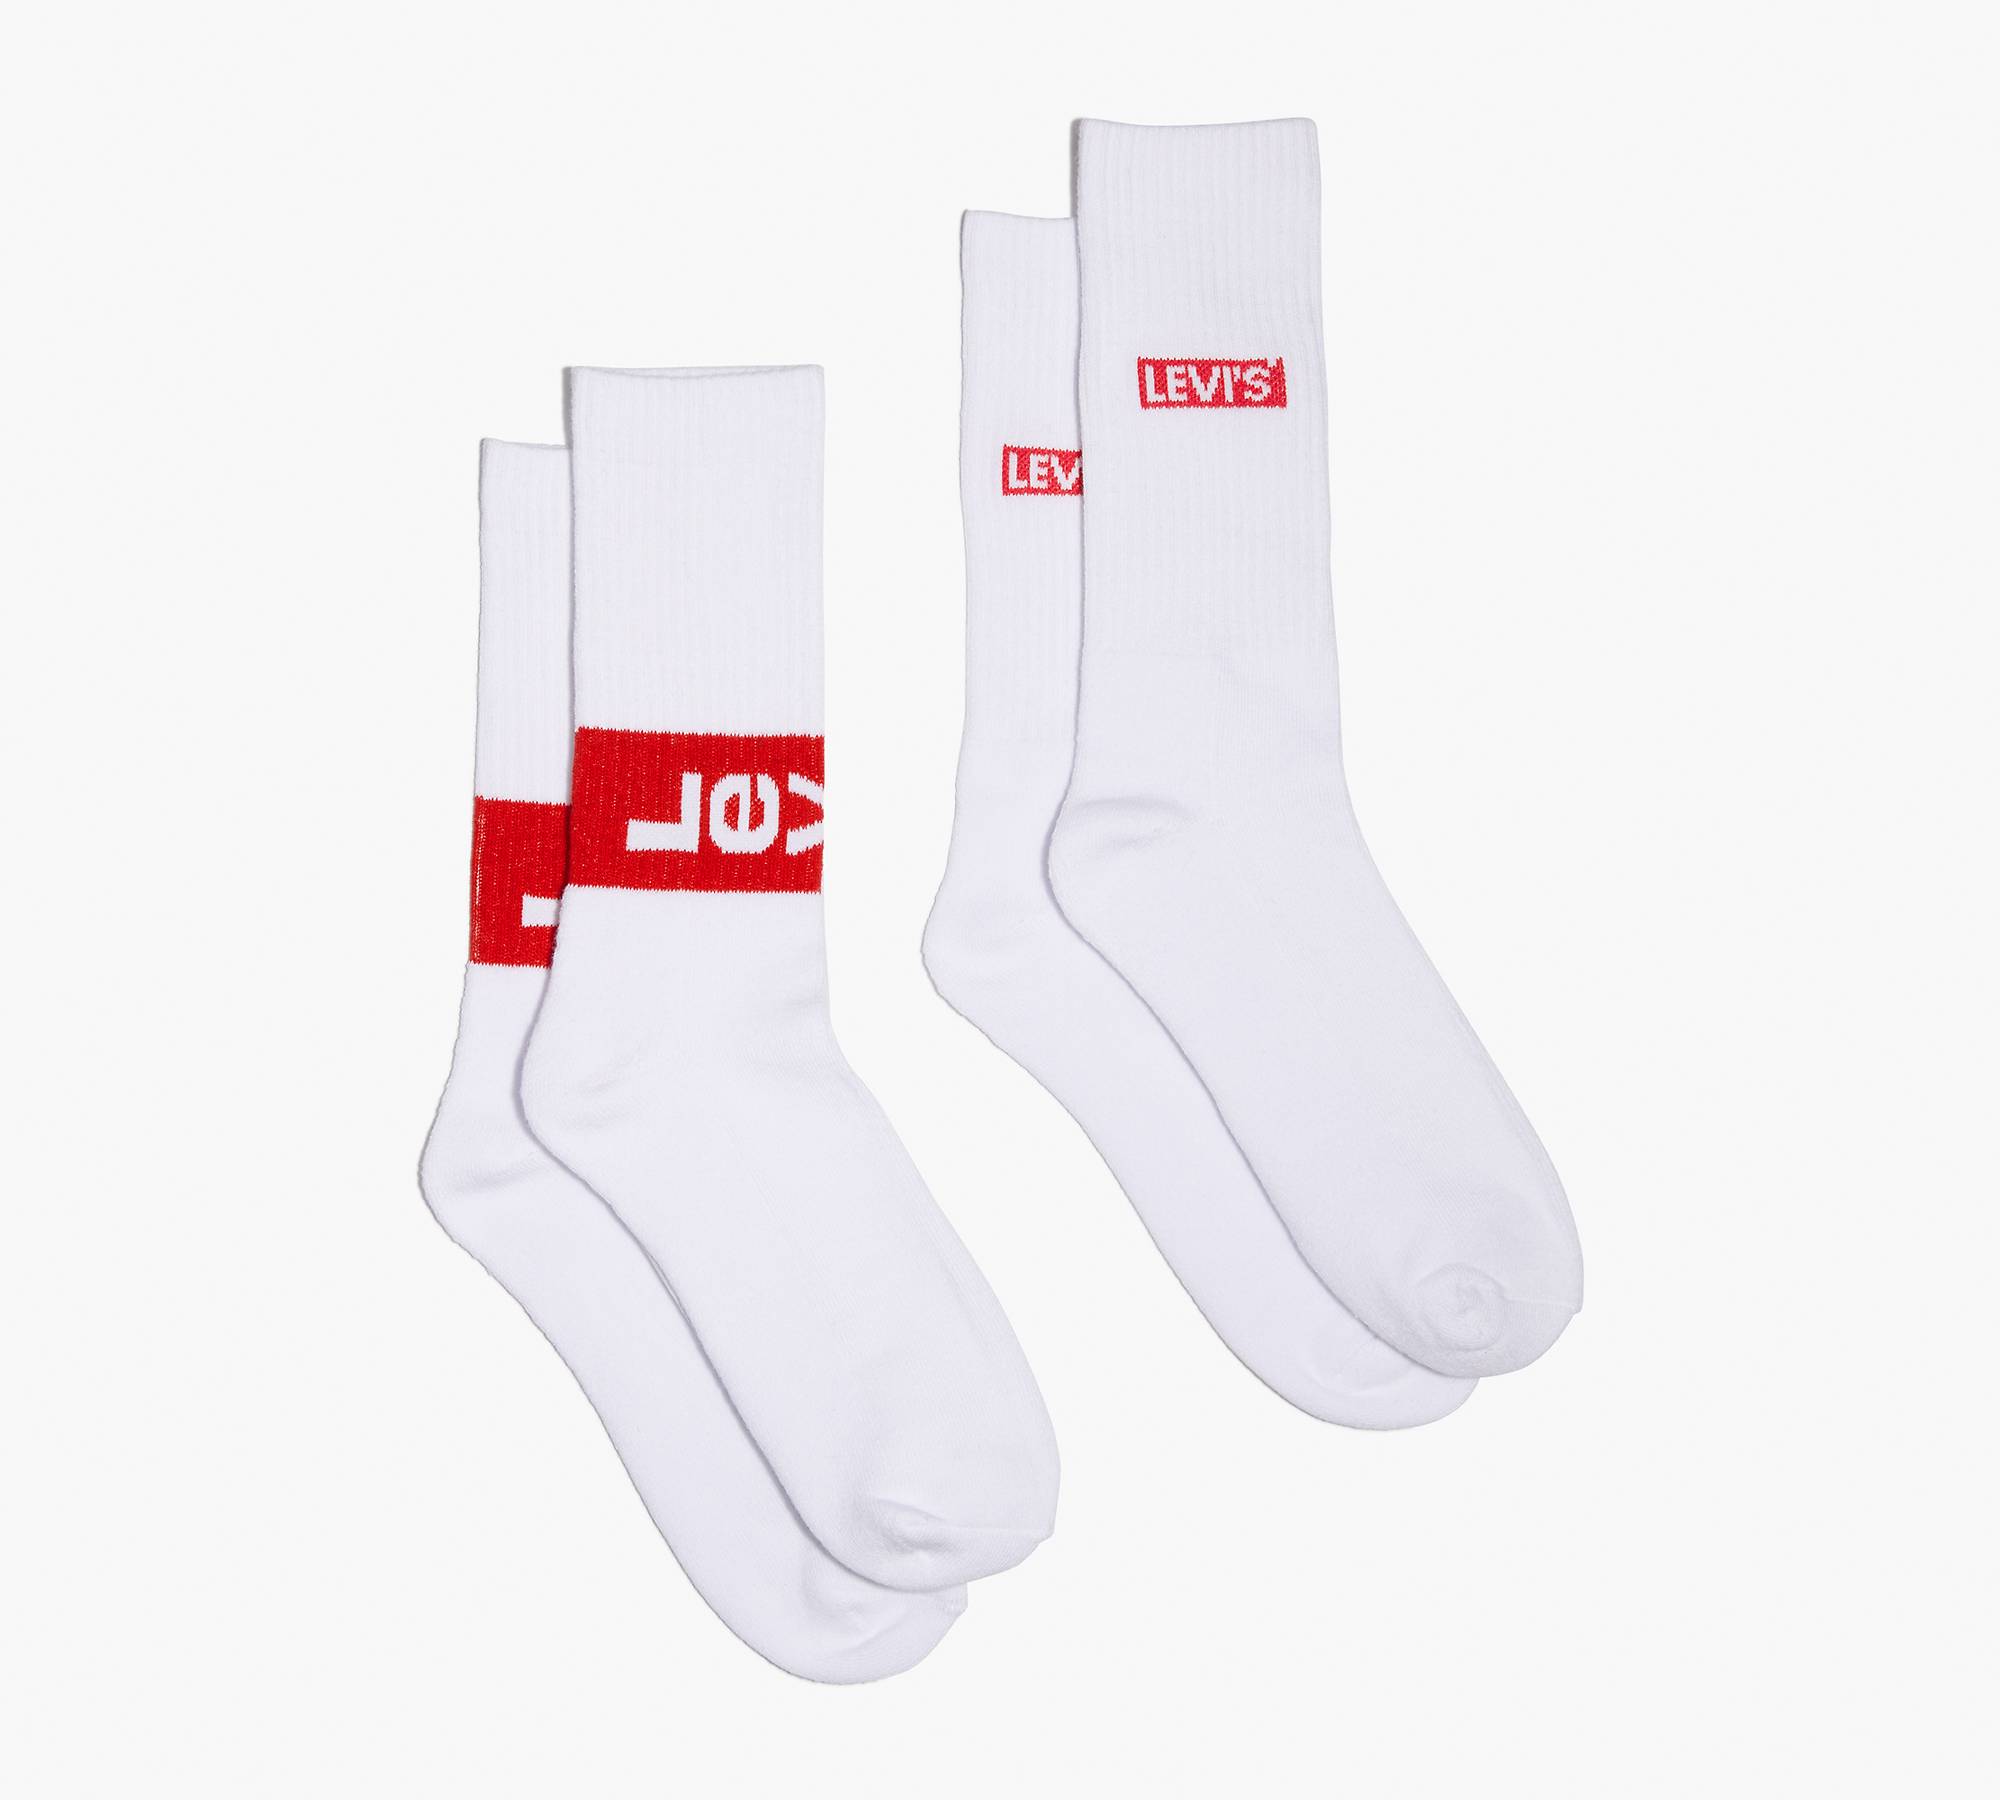 Chaussettes coupe traditionnelle Levi'sMD (Duopack) 1